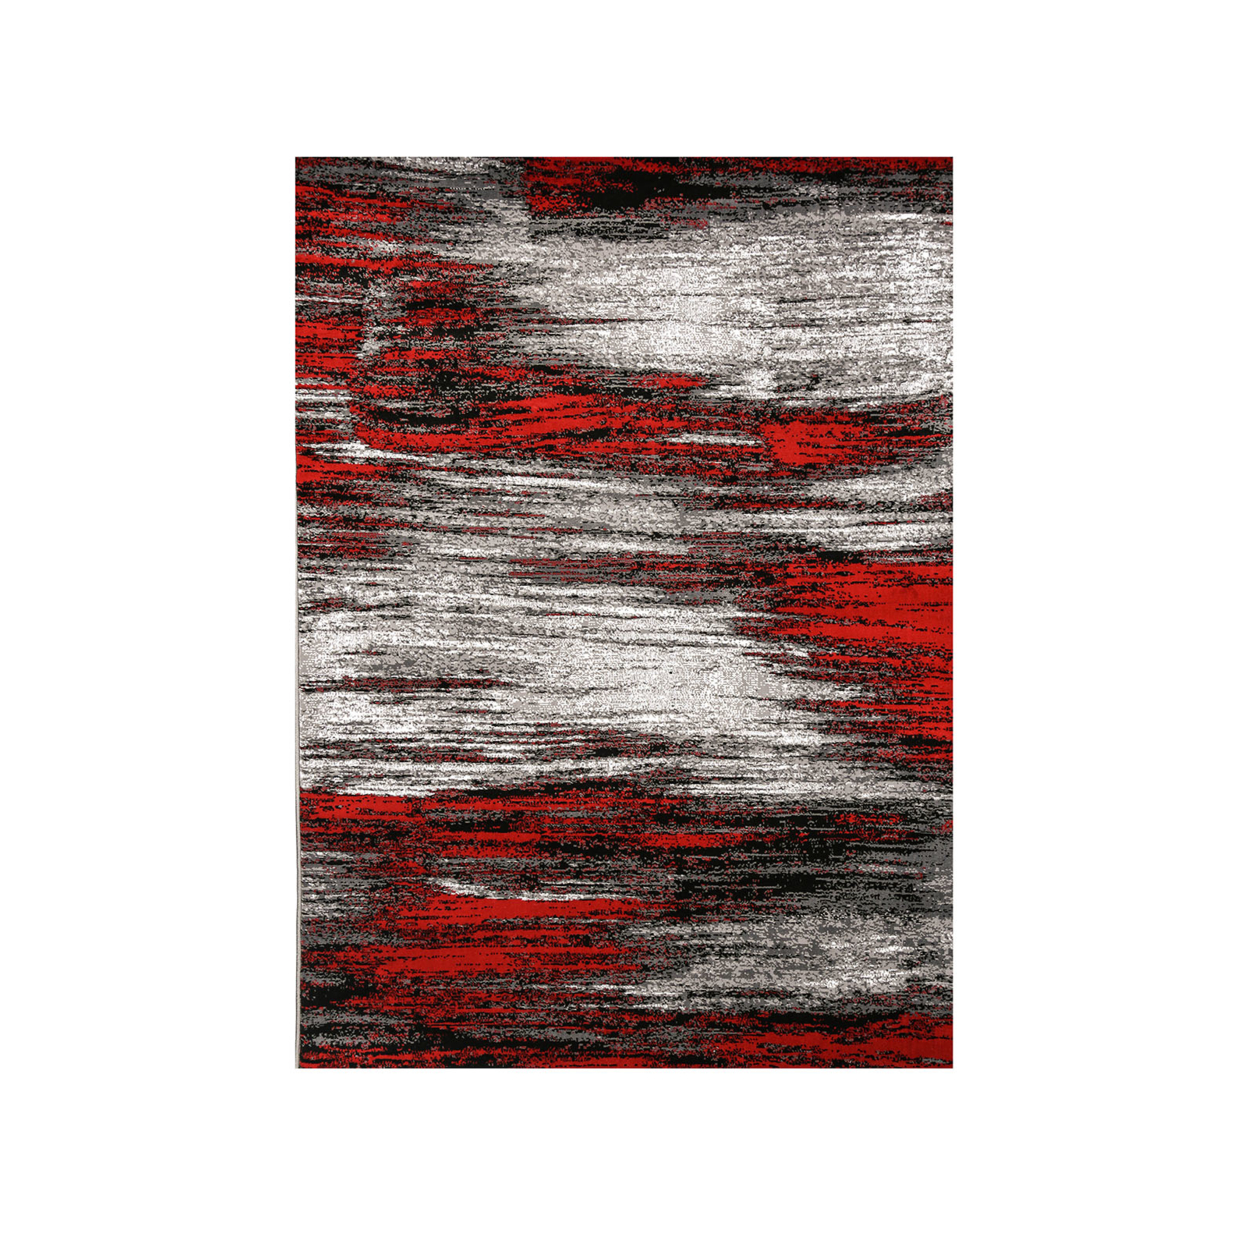 Shaded Patterned Area Rug In Polyester With Jute Mesh, Small, Red And Gray- Saltoro Sherpi